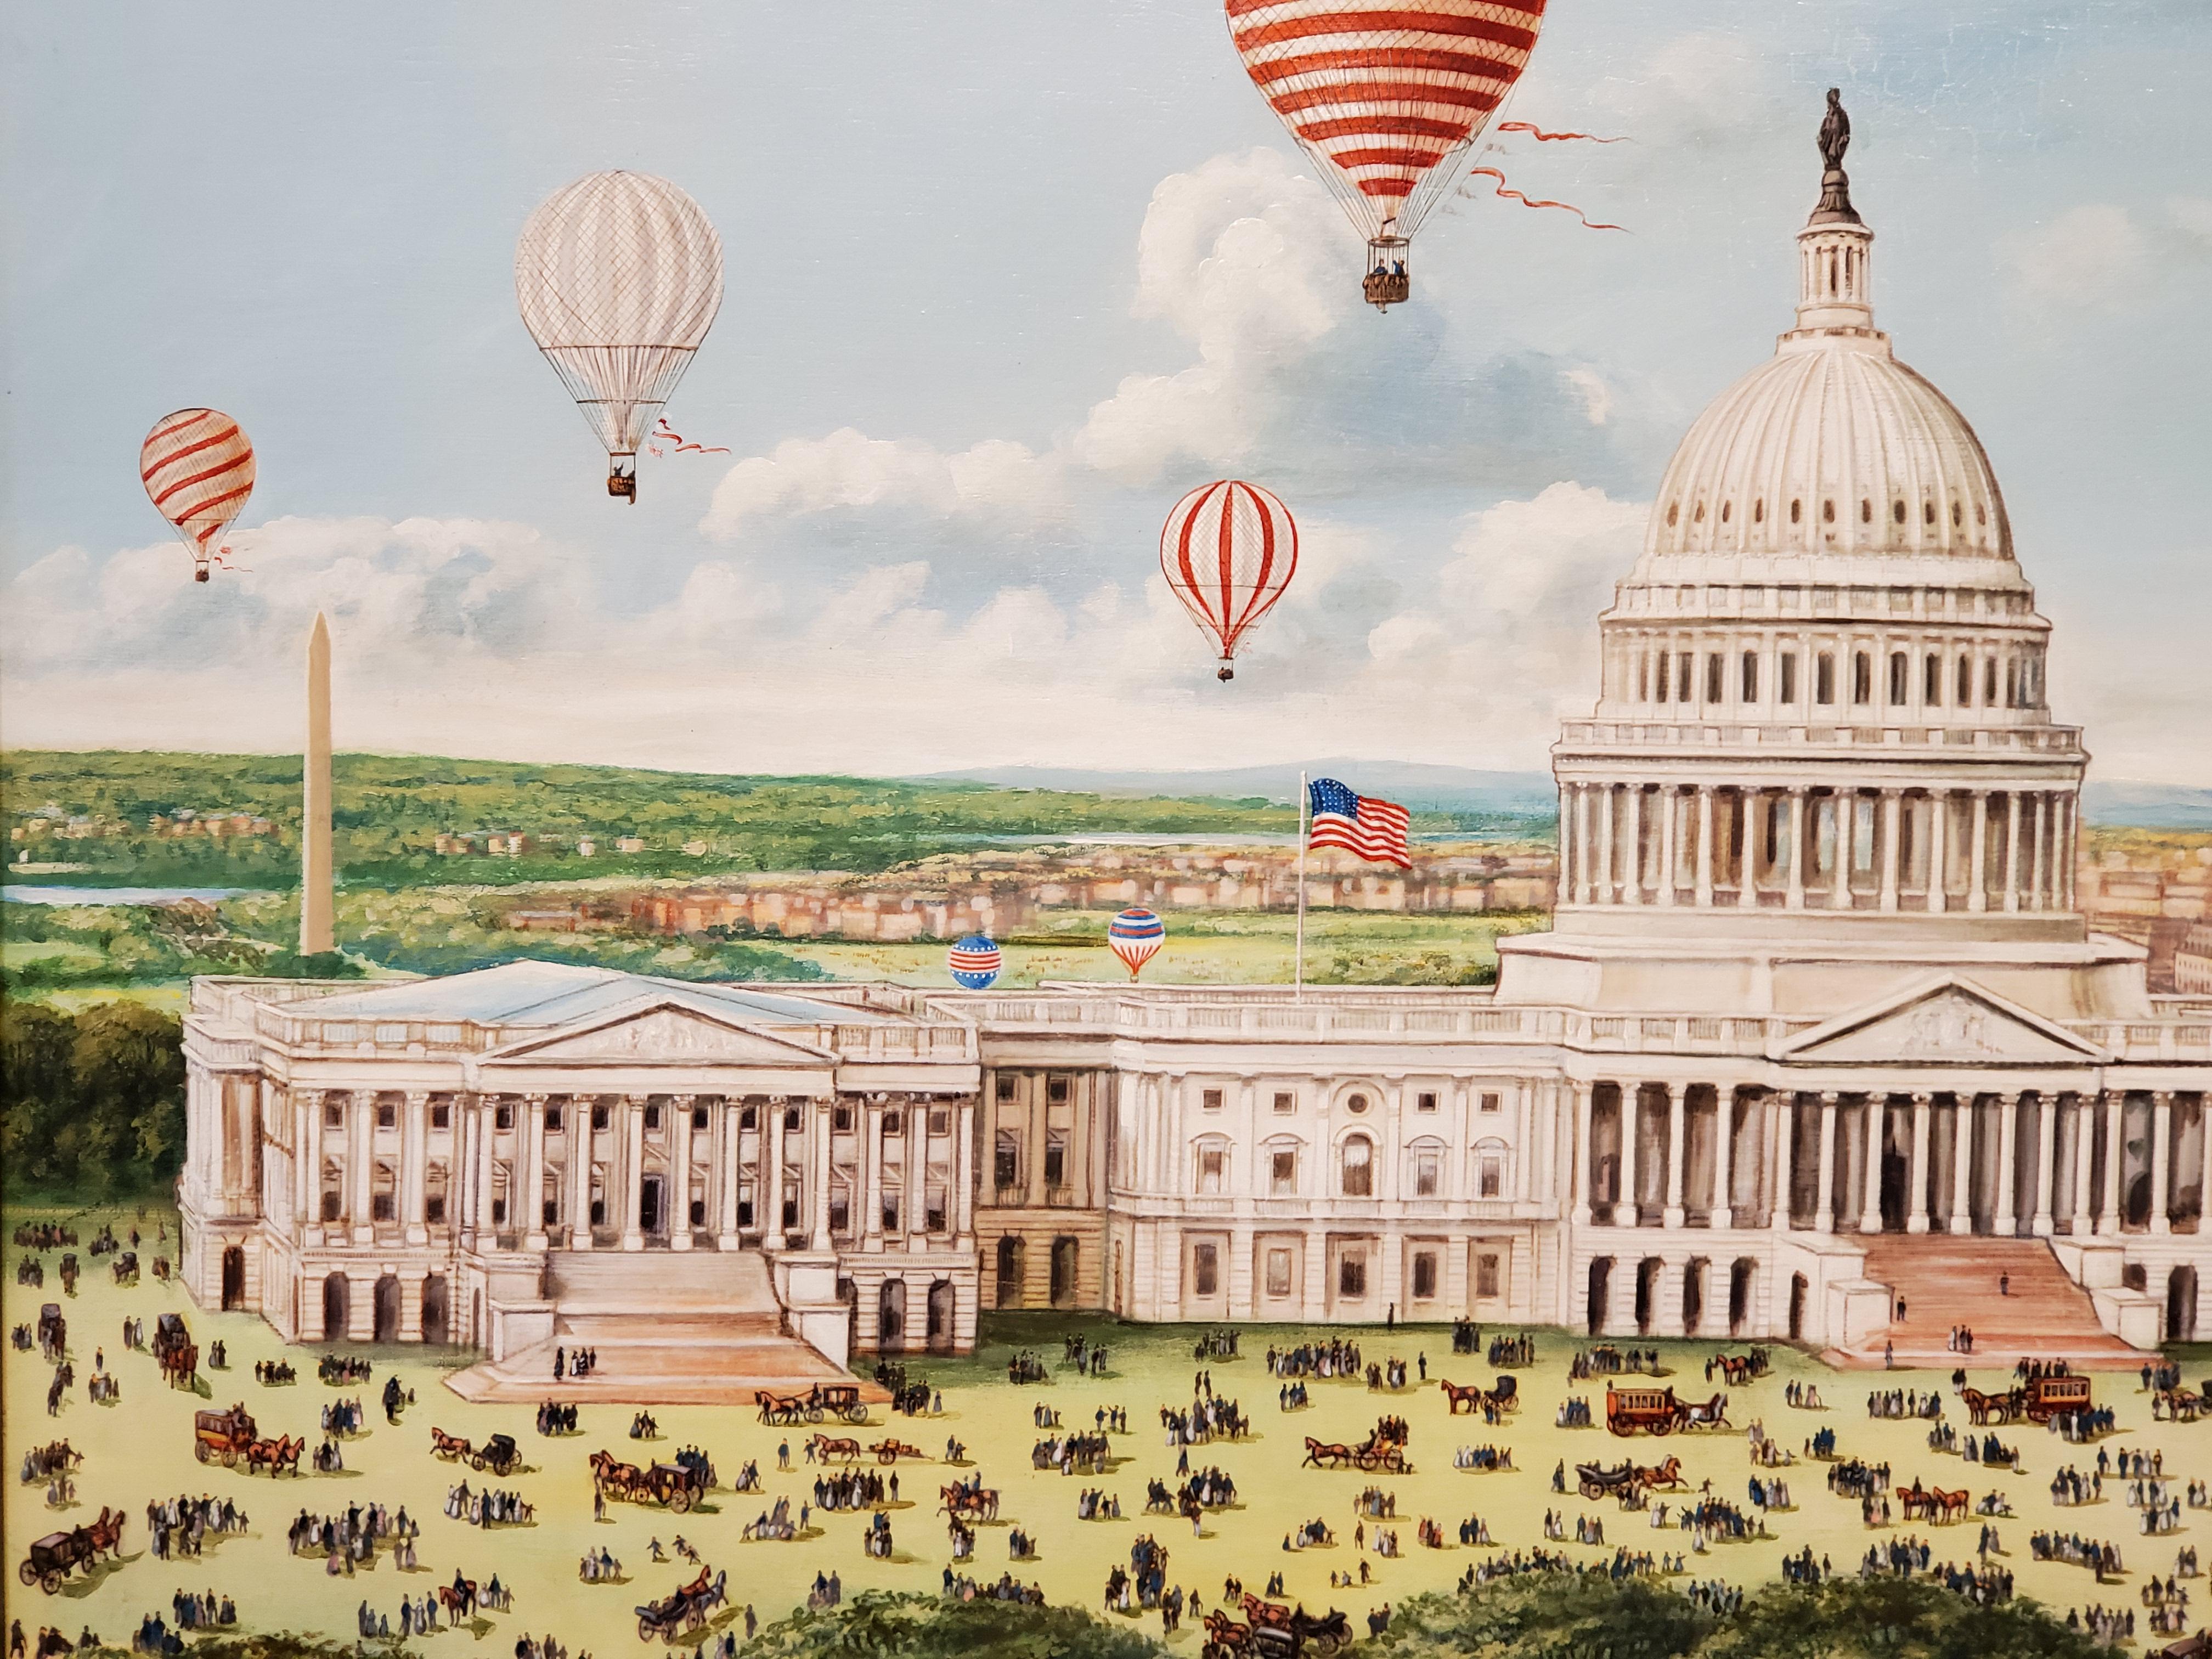 Grand 19th century Aeronautical Spectacular Over the US Capitol by Morris Flight 4